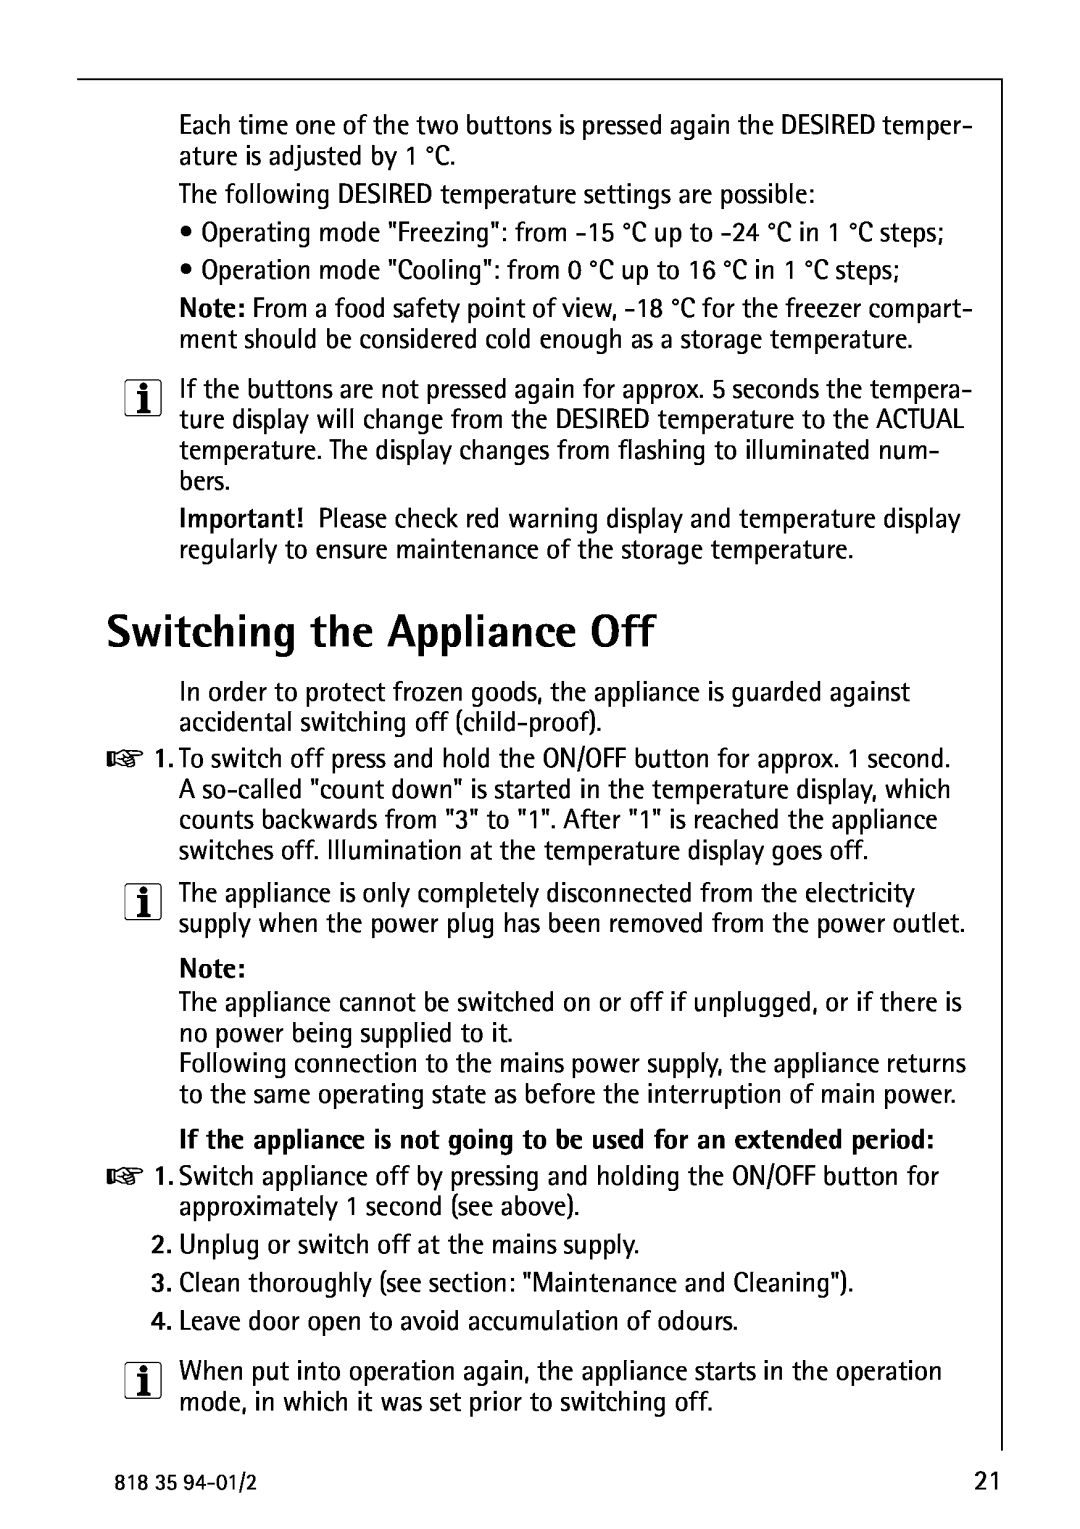 Electrolux U31462 Switching the Appliance Off, If the appliance is not going to be used for an extended period 